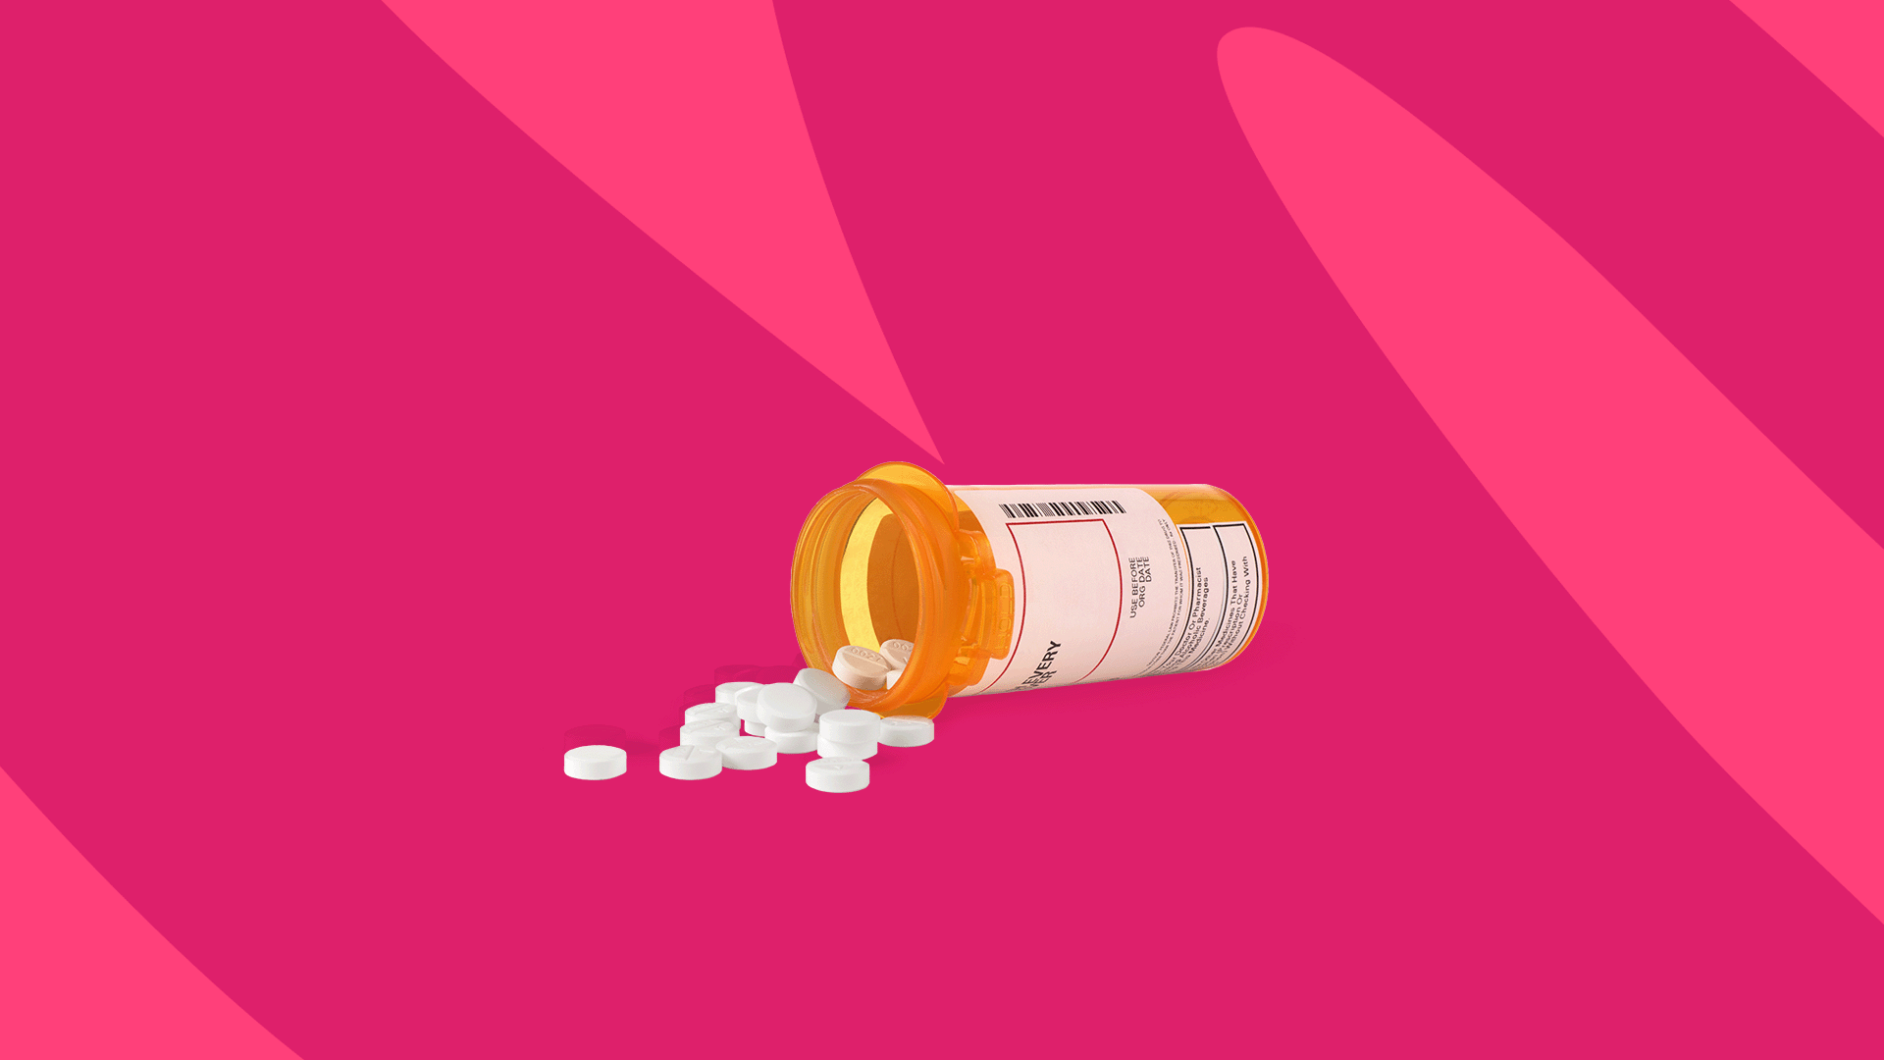 Rx pill bottle: Labetalol side effects and how to avoid them